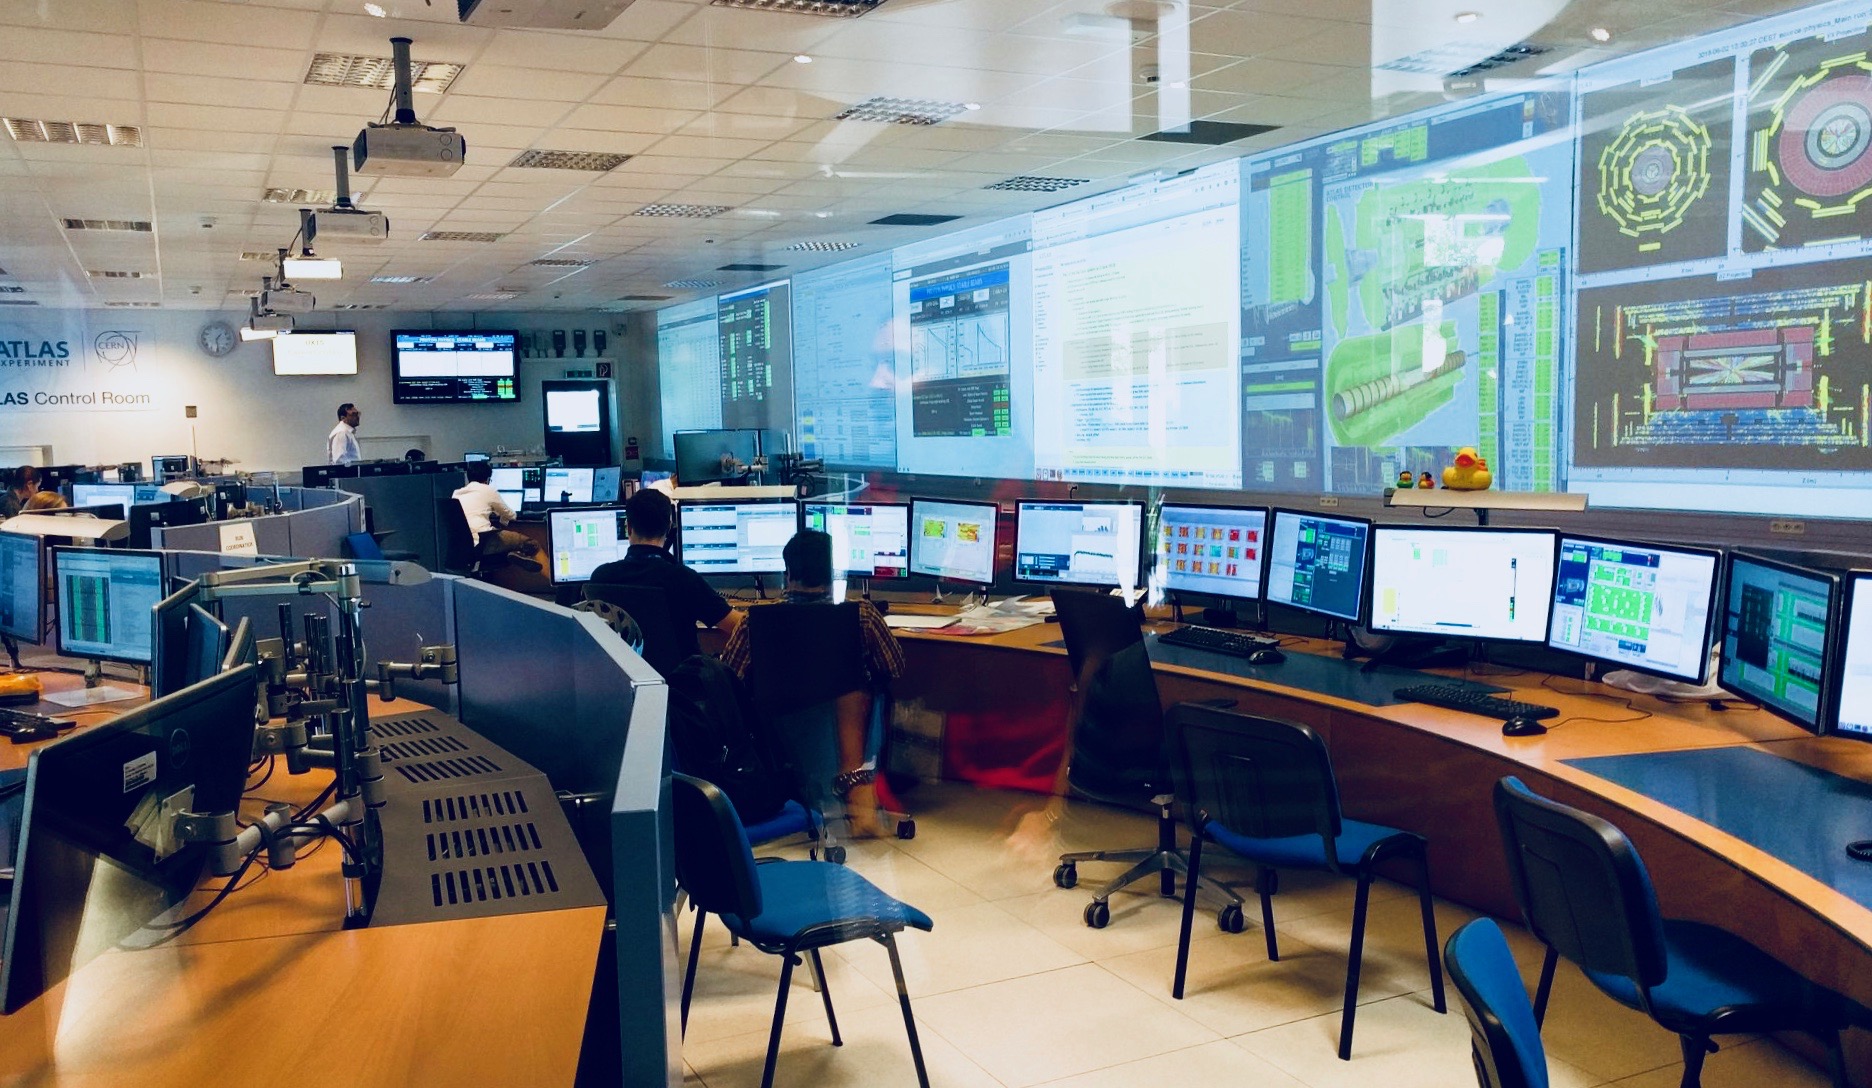  A view of a control room at CERN.  